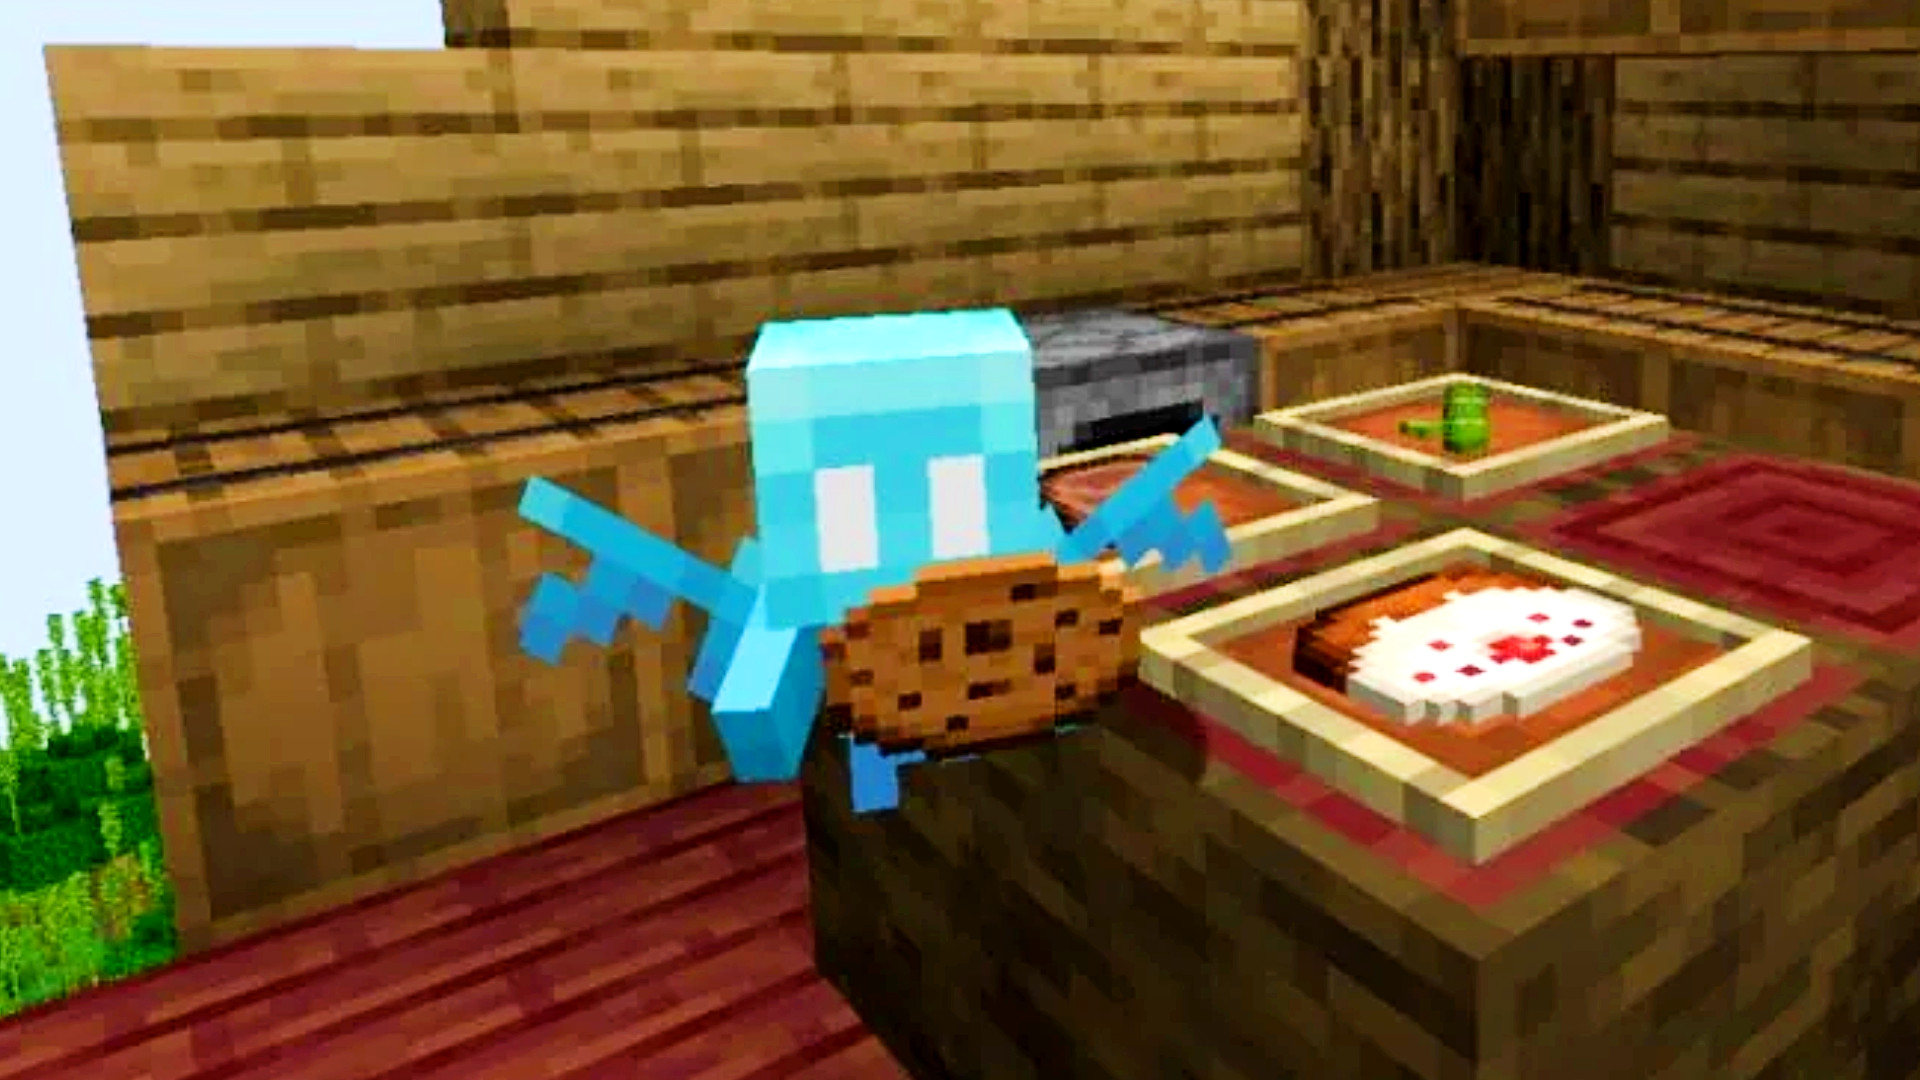 The new pre-release Minecraft update helps detect server tomfoolery